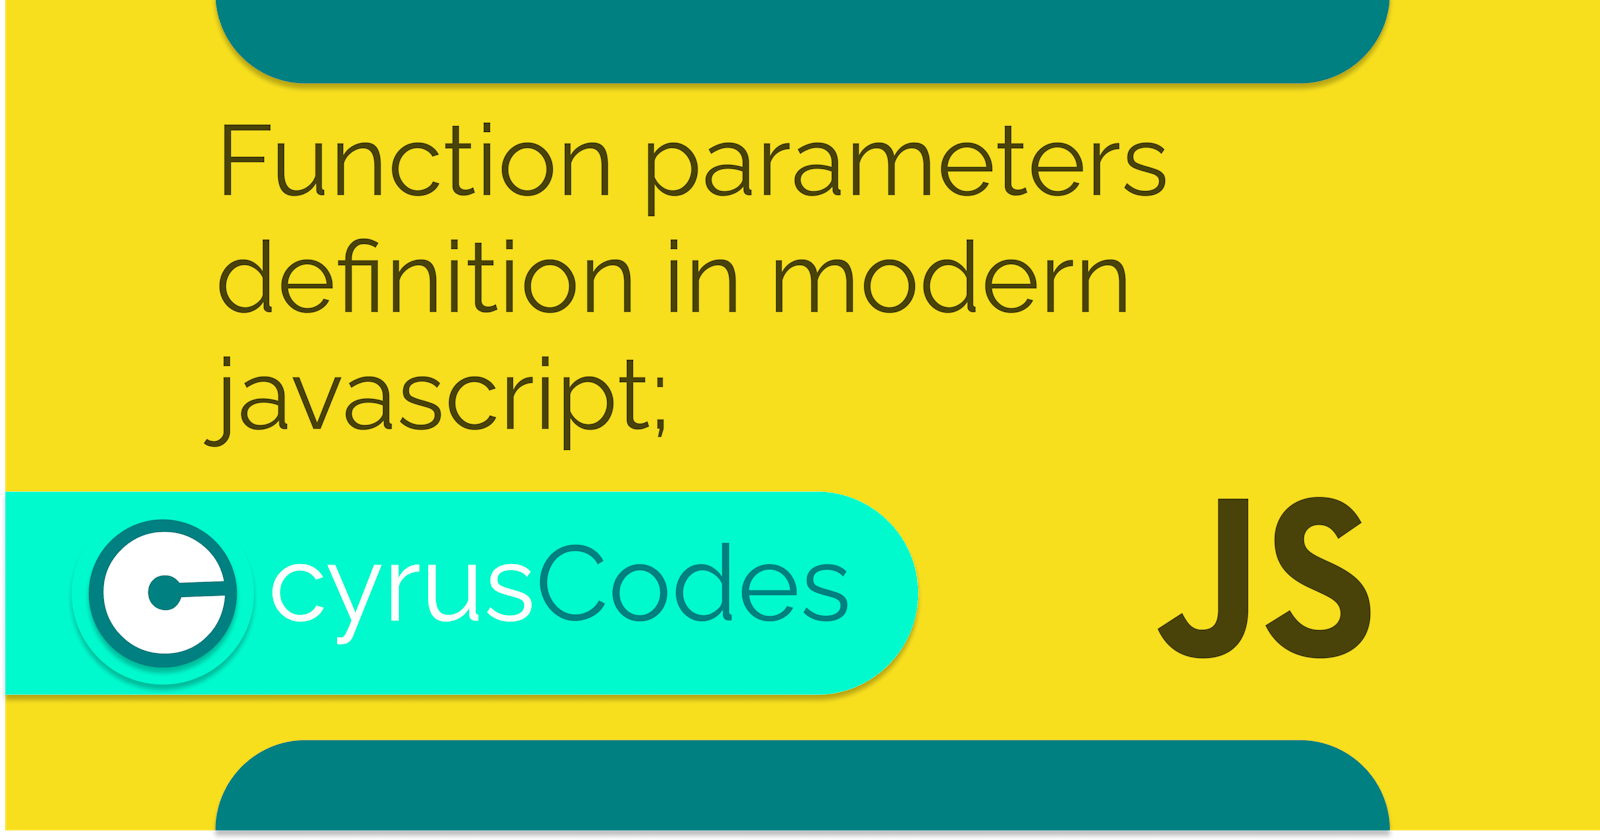 About Function parameters definition in modern javascript;